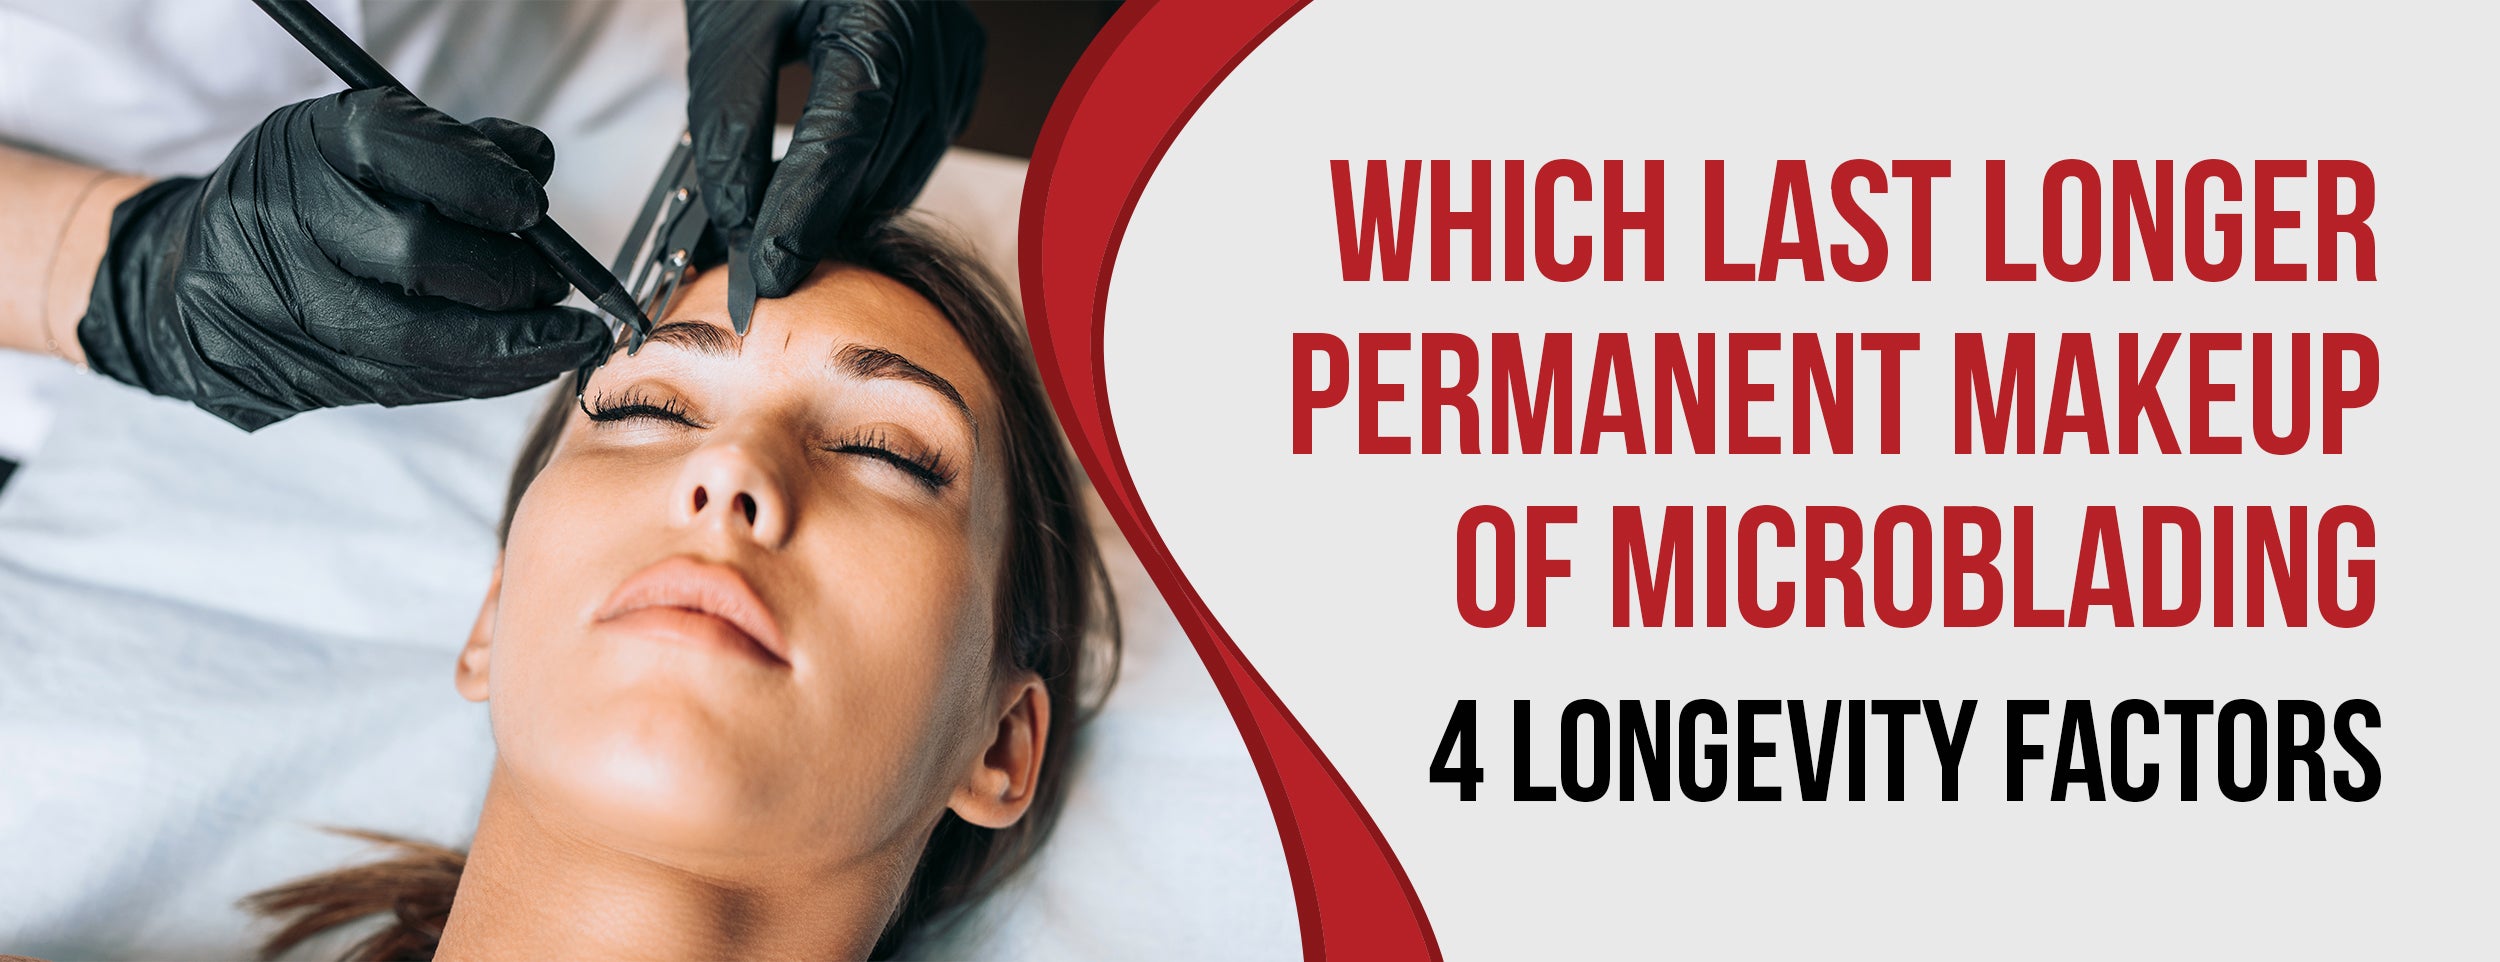 5 Differences & 4 Longevity Factors Between Permanent Makeup and Microblading